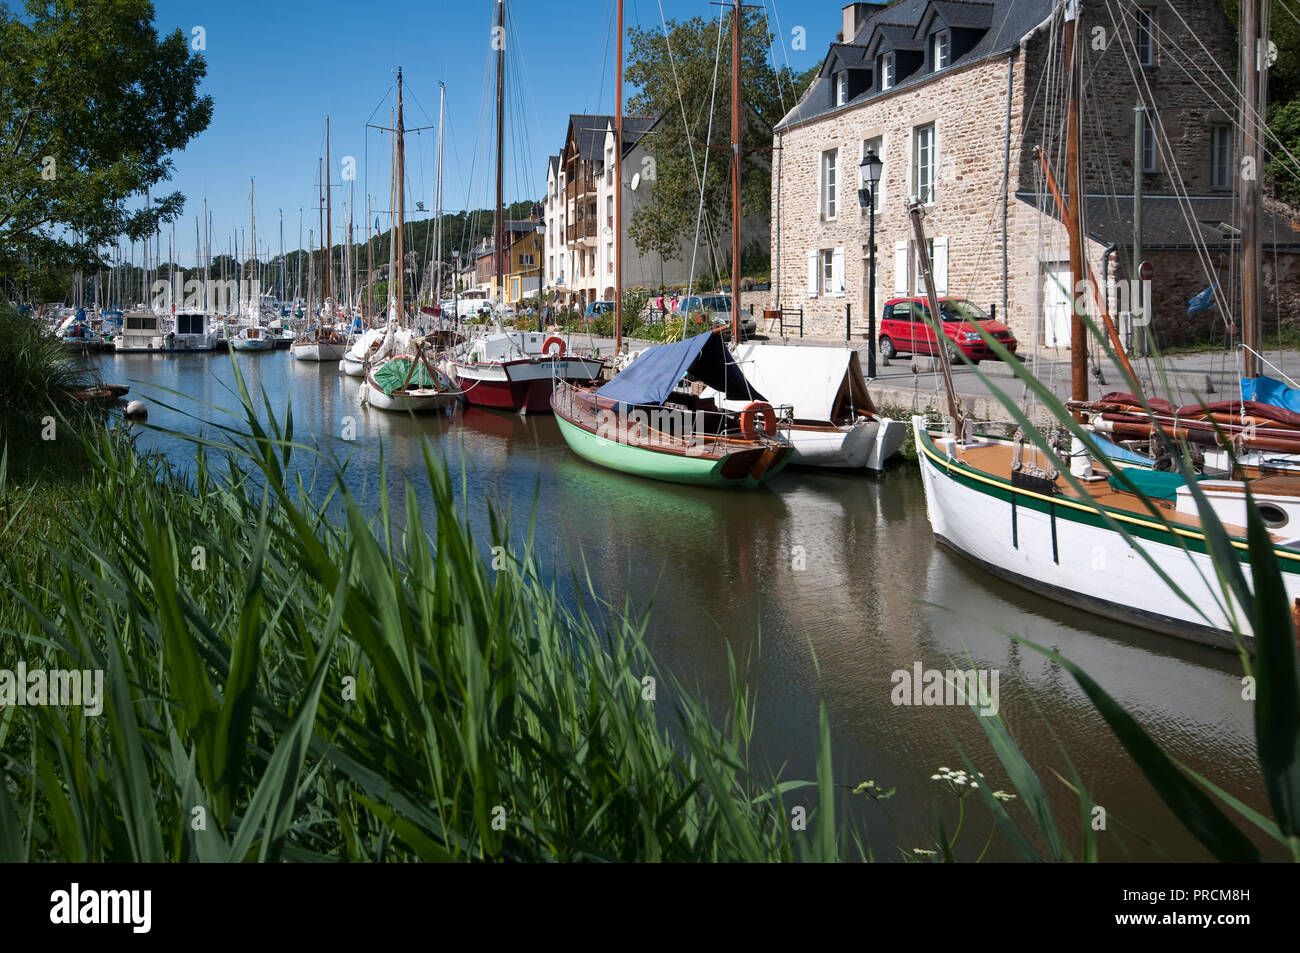 A picturesque inlet of the river, La Vilaine, which passes La Roche-Bernard, located in the Morbihan department of Brittany in north-western France Stock Photo